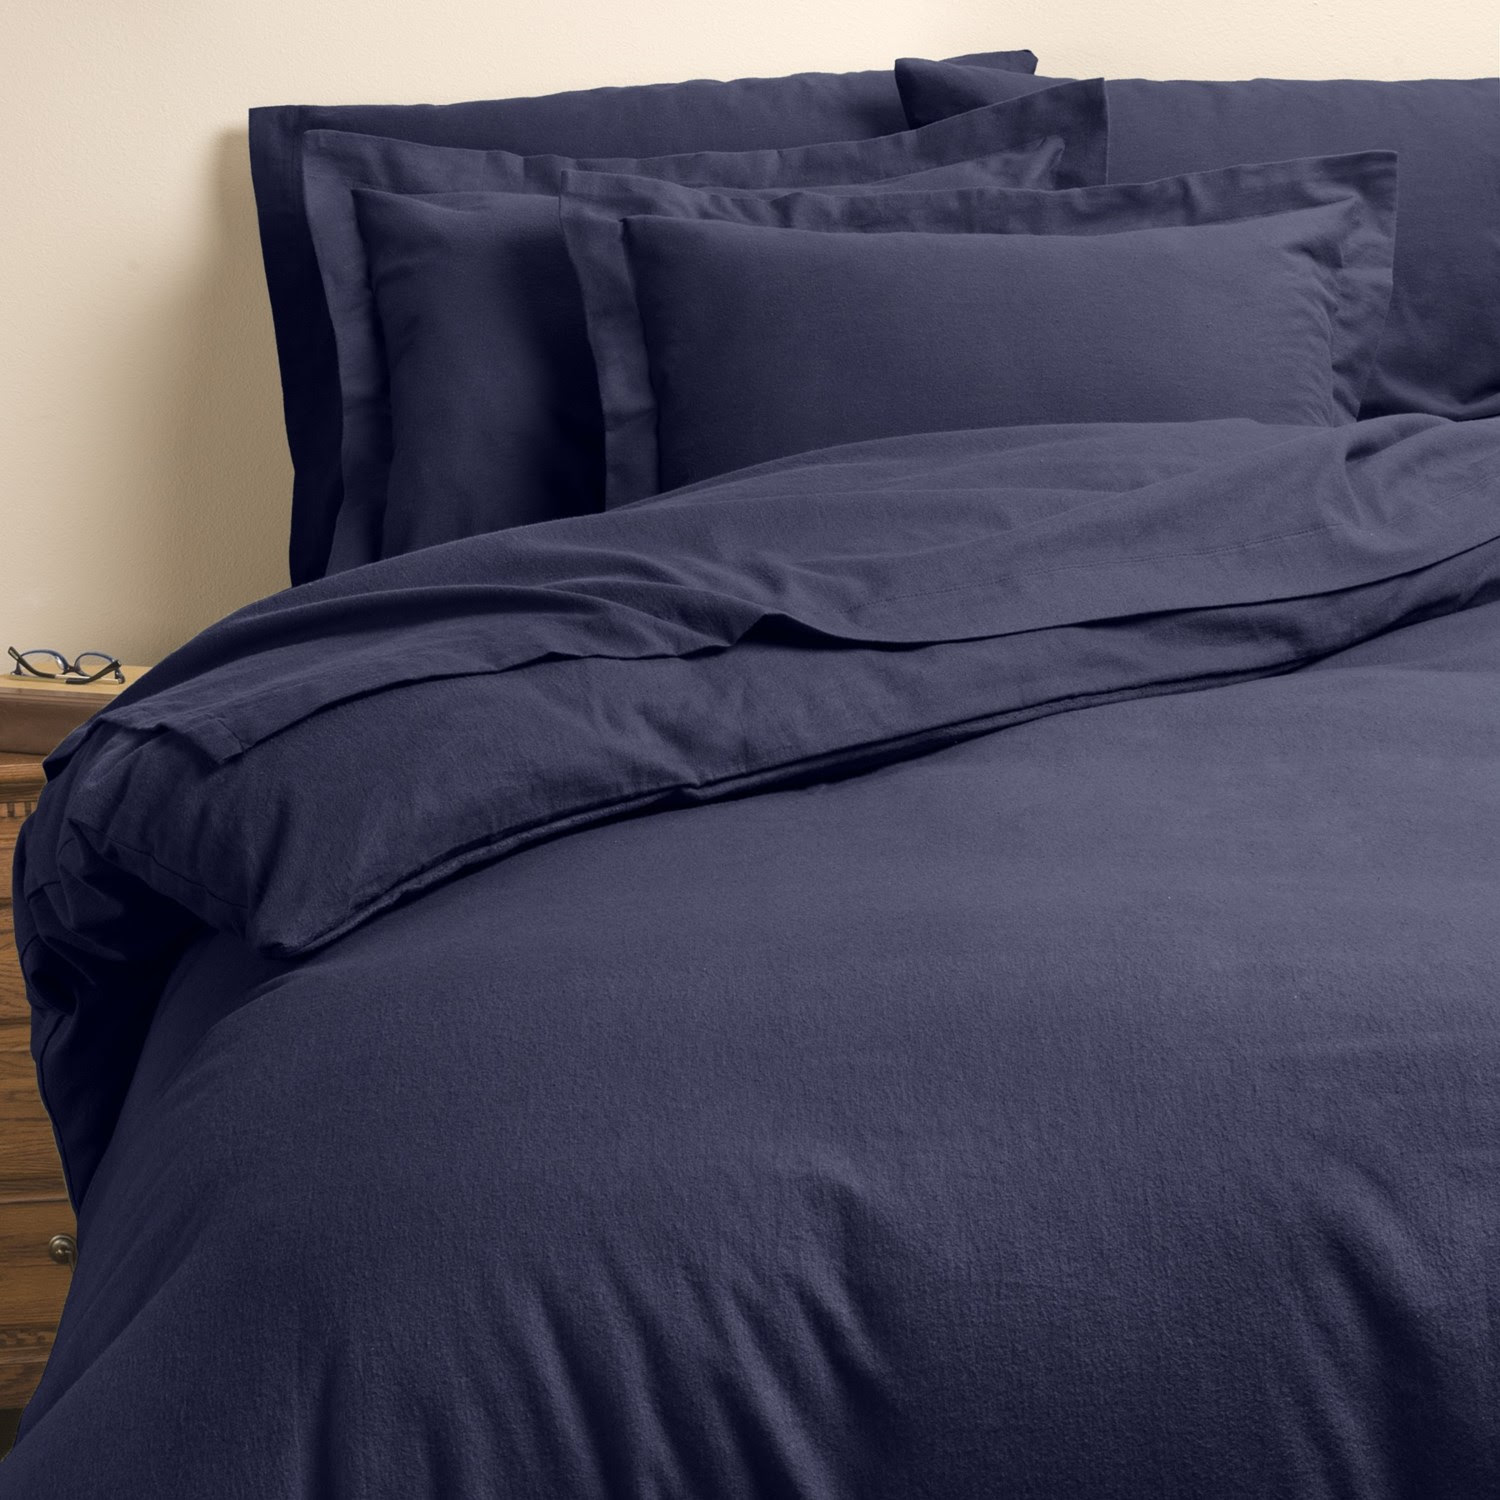 costco flannel sheets king size